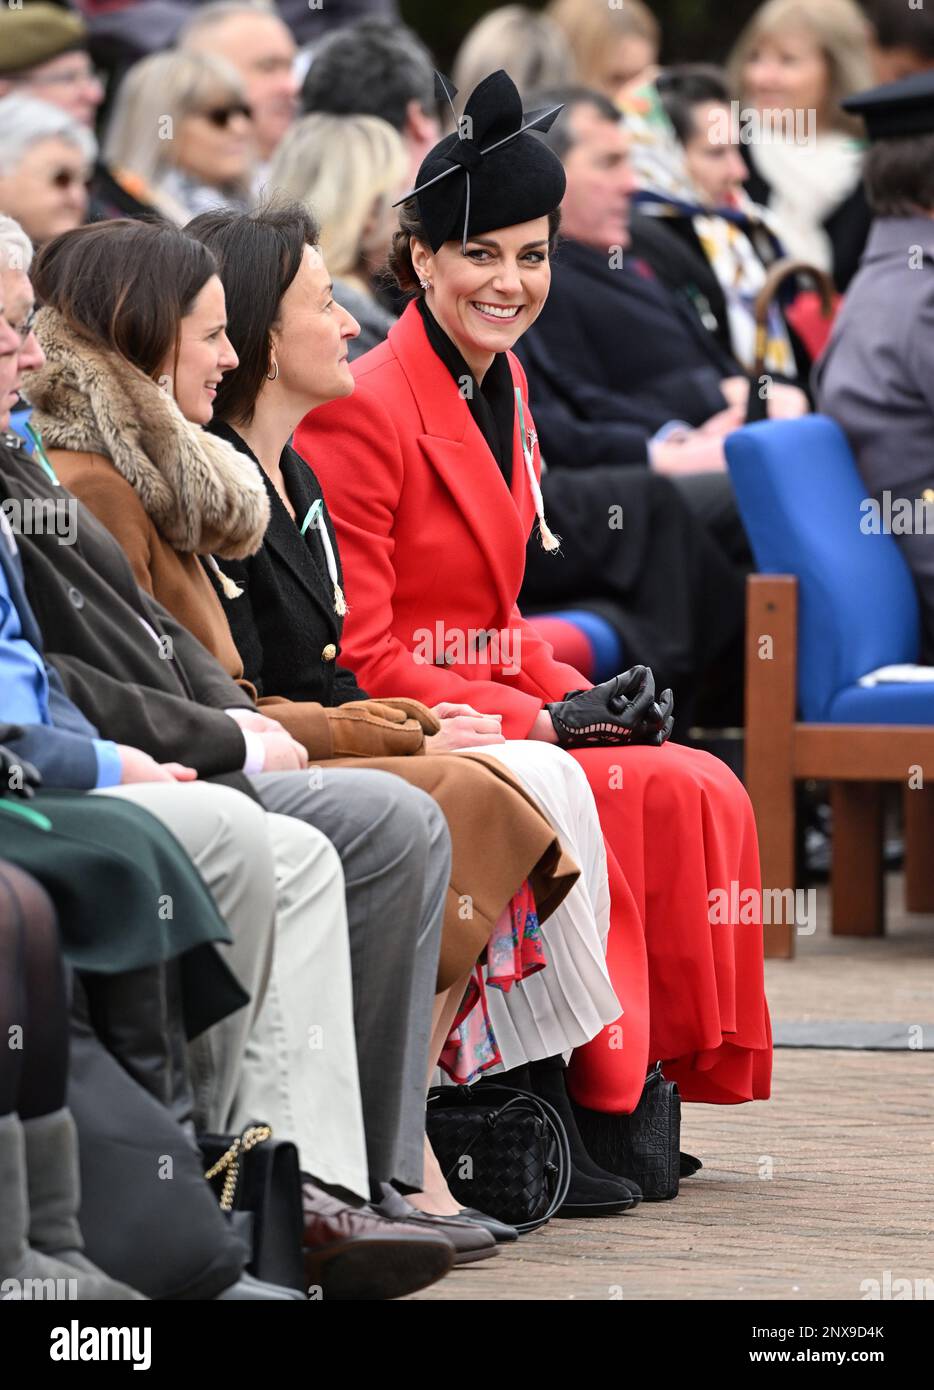 Windsor, UK. 01st Mar, 2023. March 1st, 2023. Windsor, UK. The Prince of Wales, Colonel of the Welsh Guards accompanied by The Princess of Wales visit the 1st Battalion Welsh Guards at Combermere Barracks, Windsor to attend the St DavidÕs Day Parade. Credit: Doug Peters/Alamy Live News Stock Photo